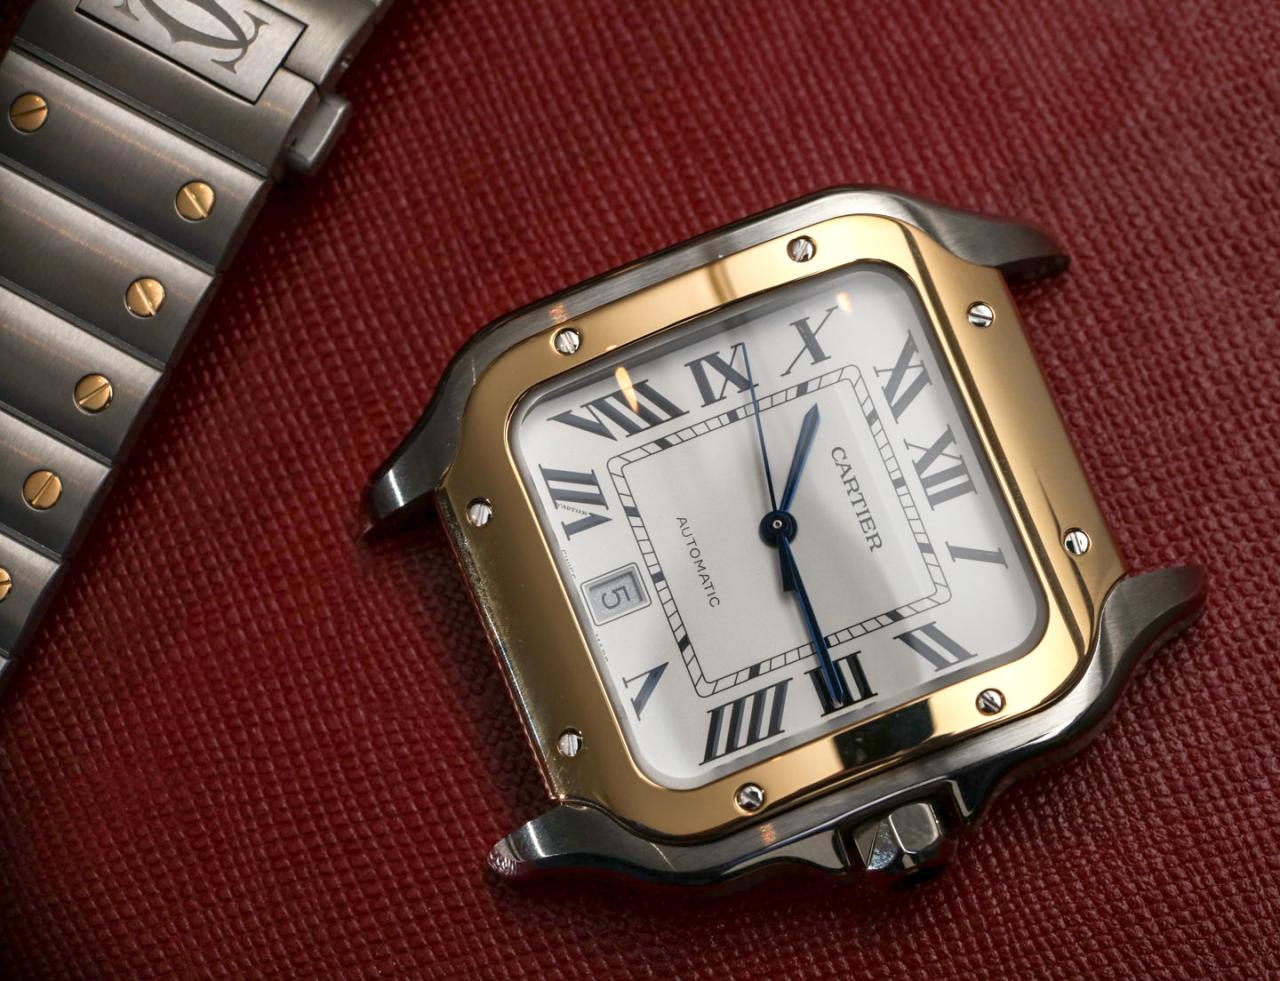 Cartier Santos Watches For 2018 Will Be A Hit With Buyers Hands-On 